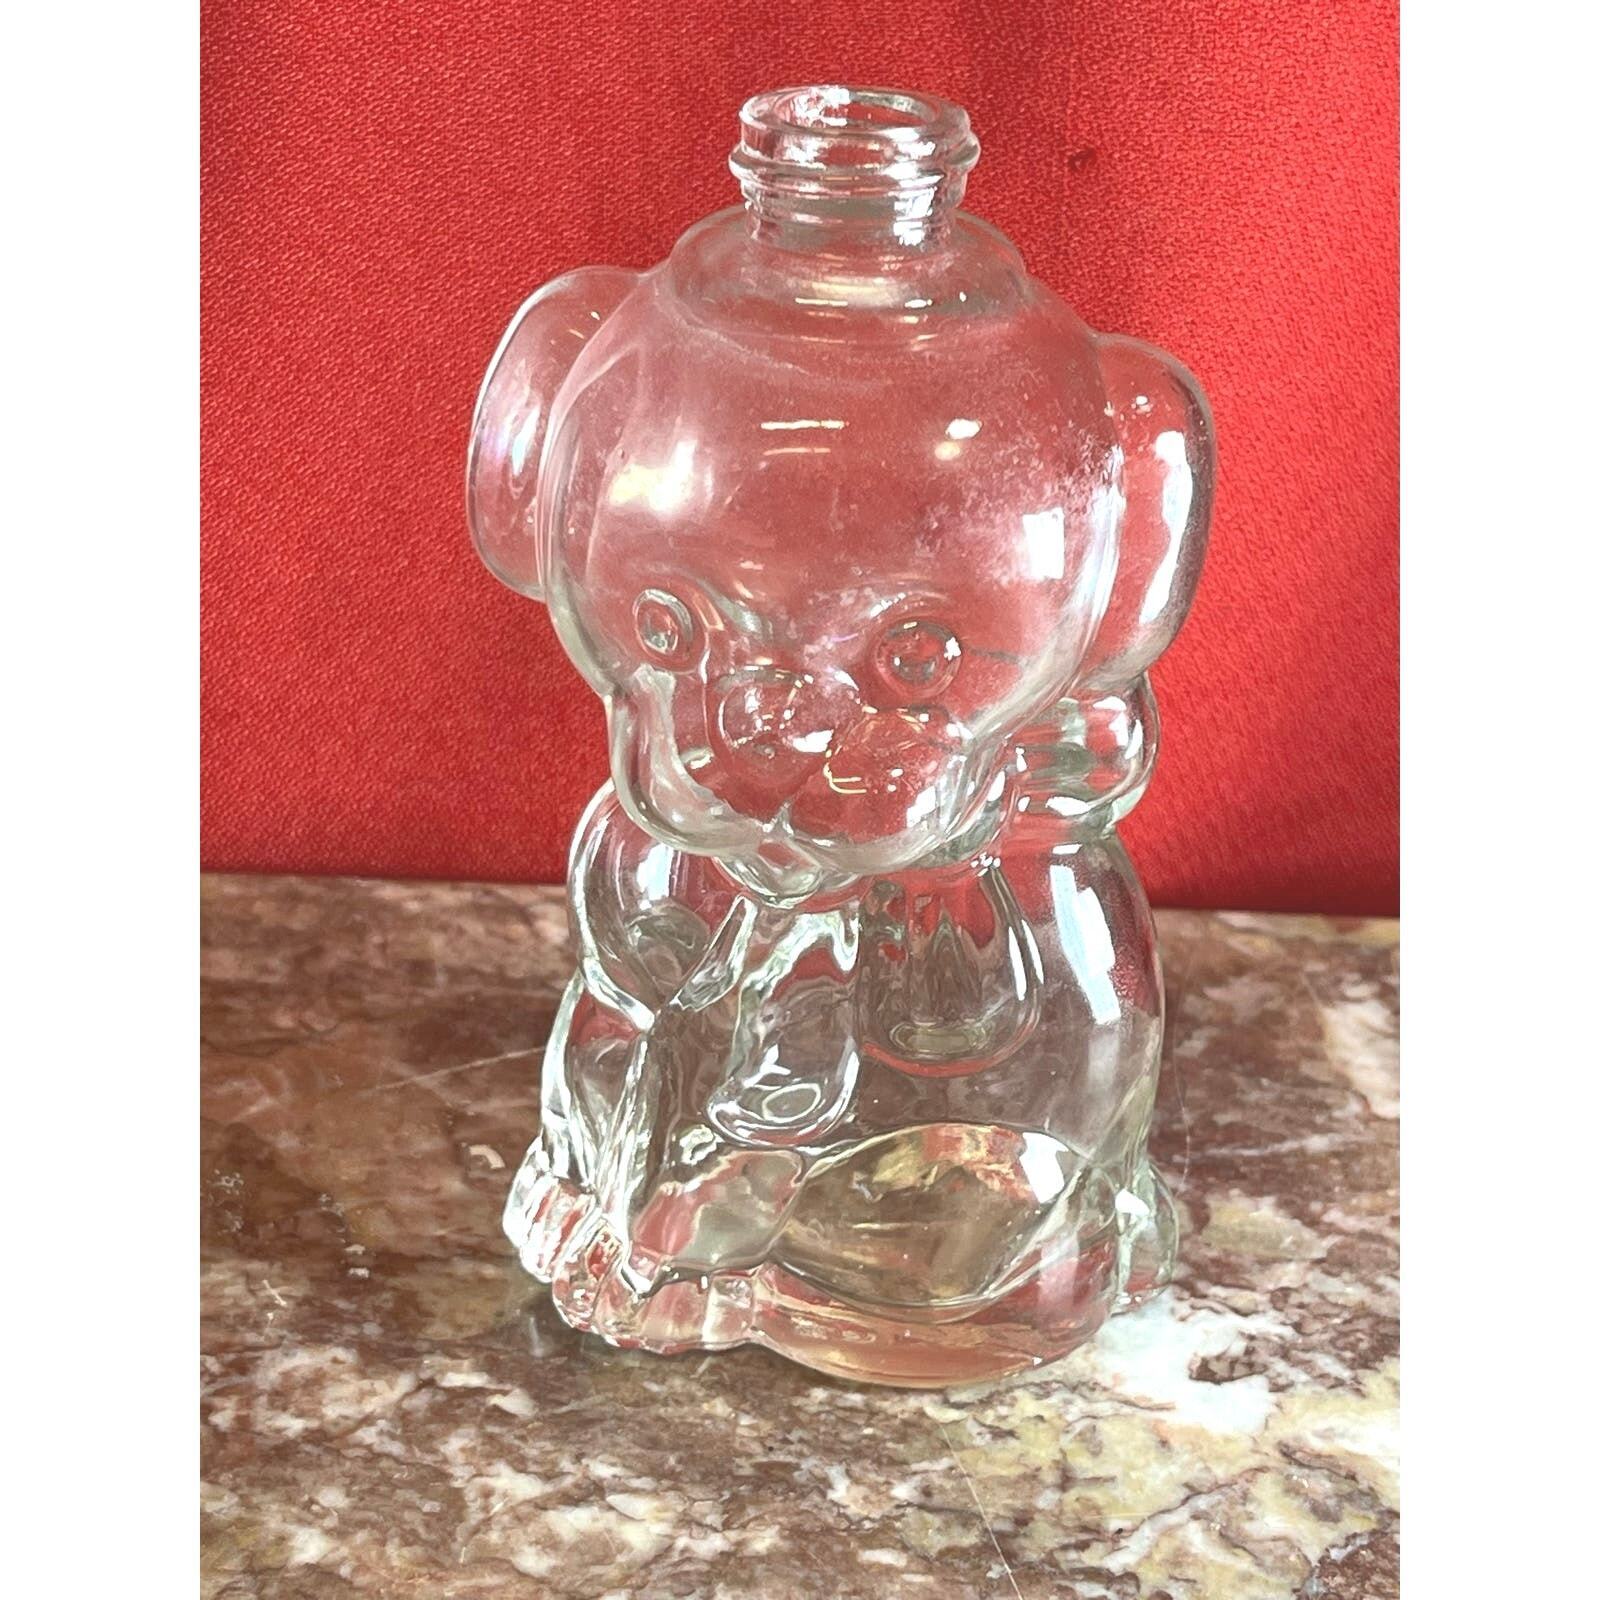 VINTAGE OLD CUTE PUPPY DOG PERFUME COLOGNE CLEAR GLASS FIGURAL BOTTLE MANON 